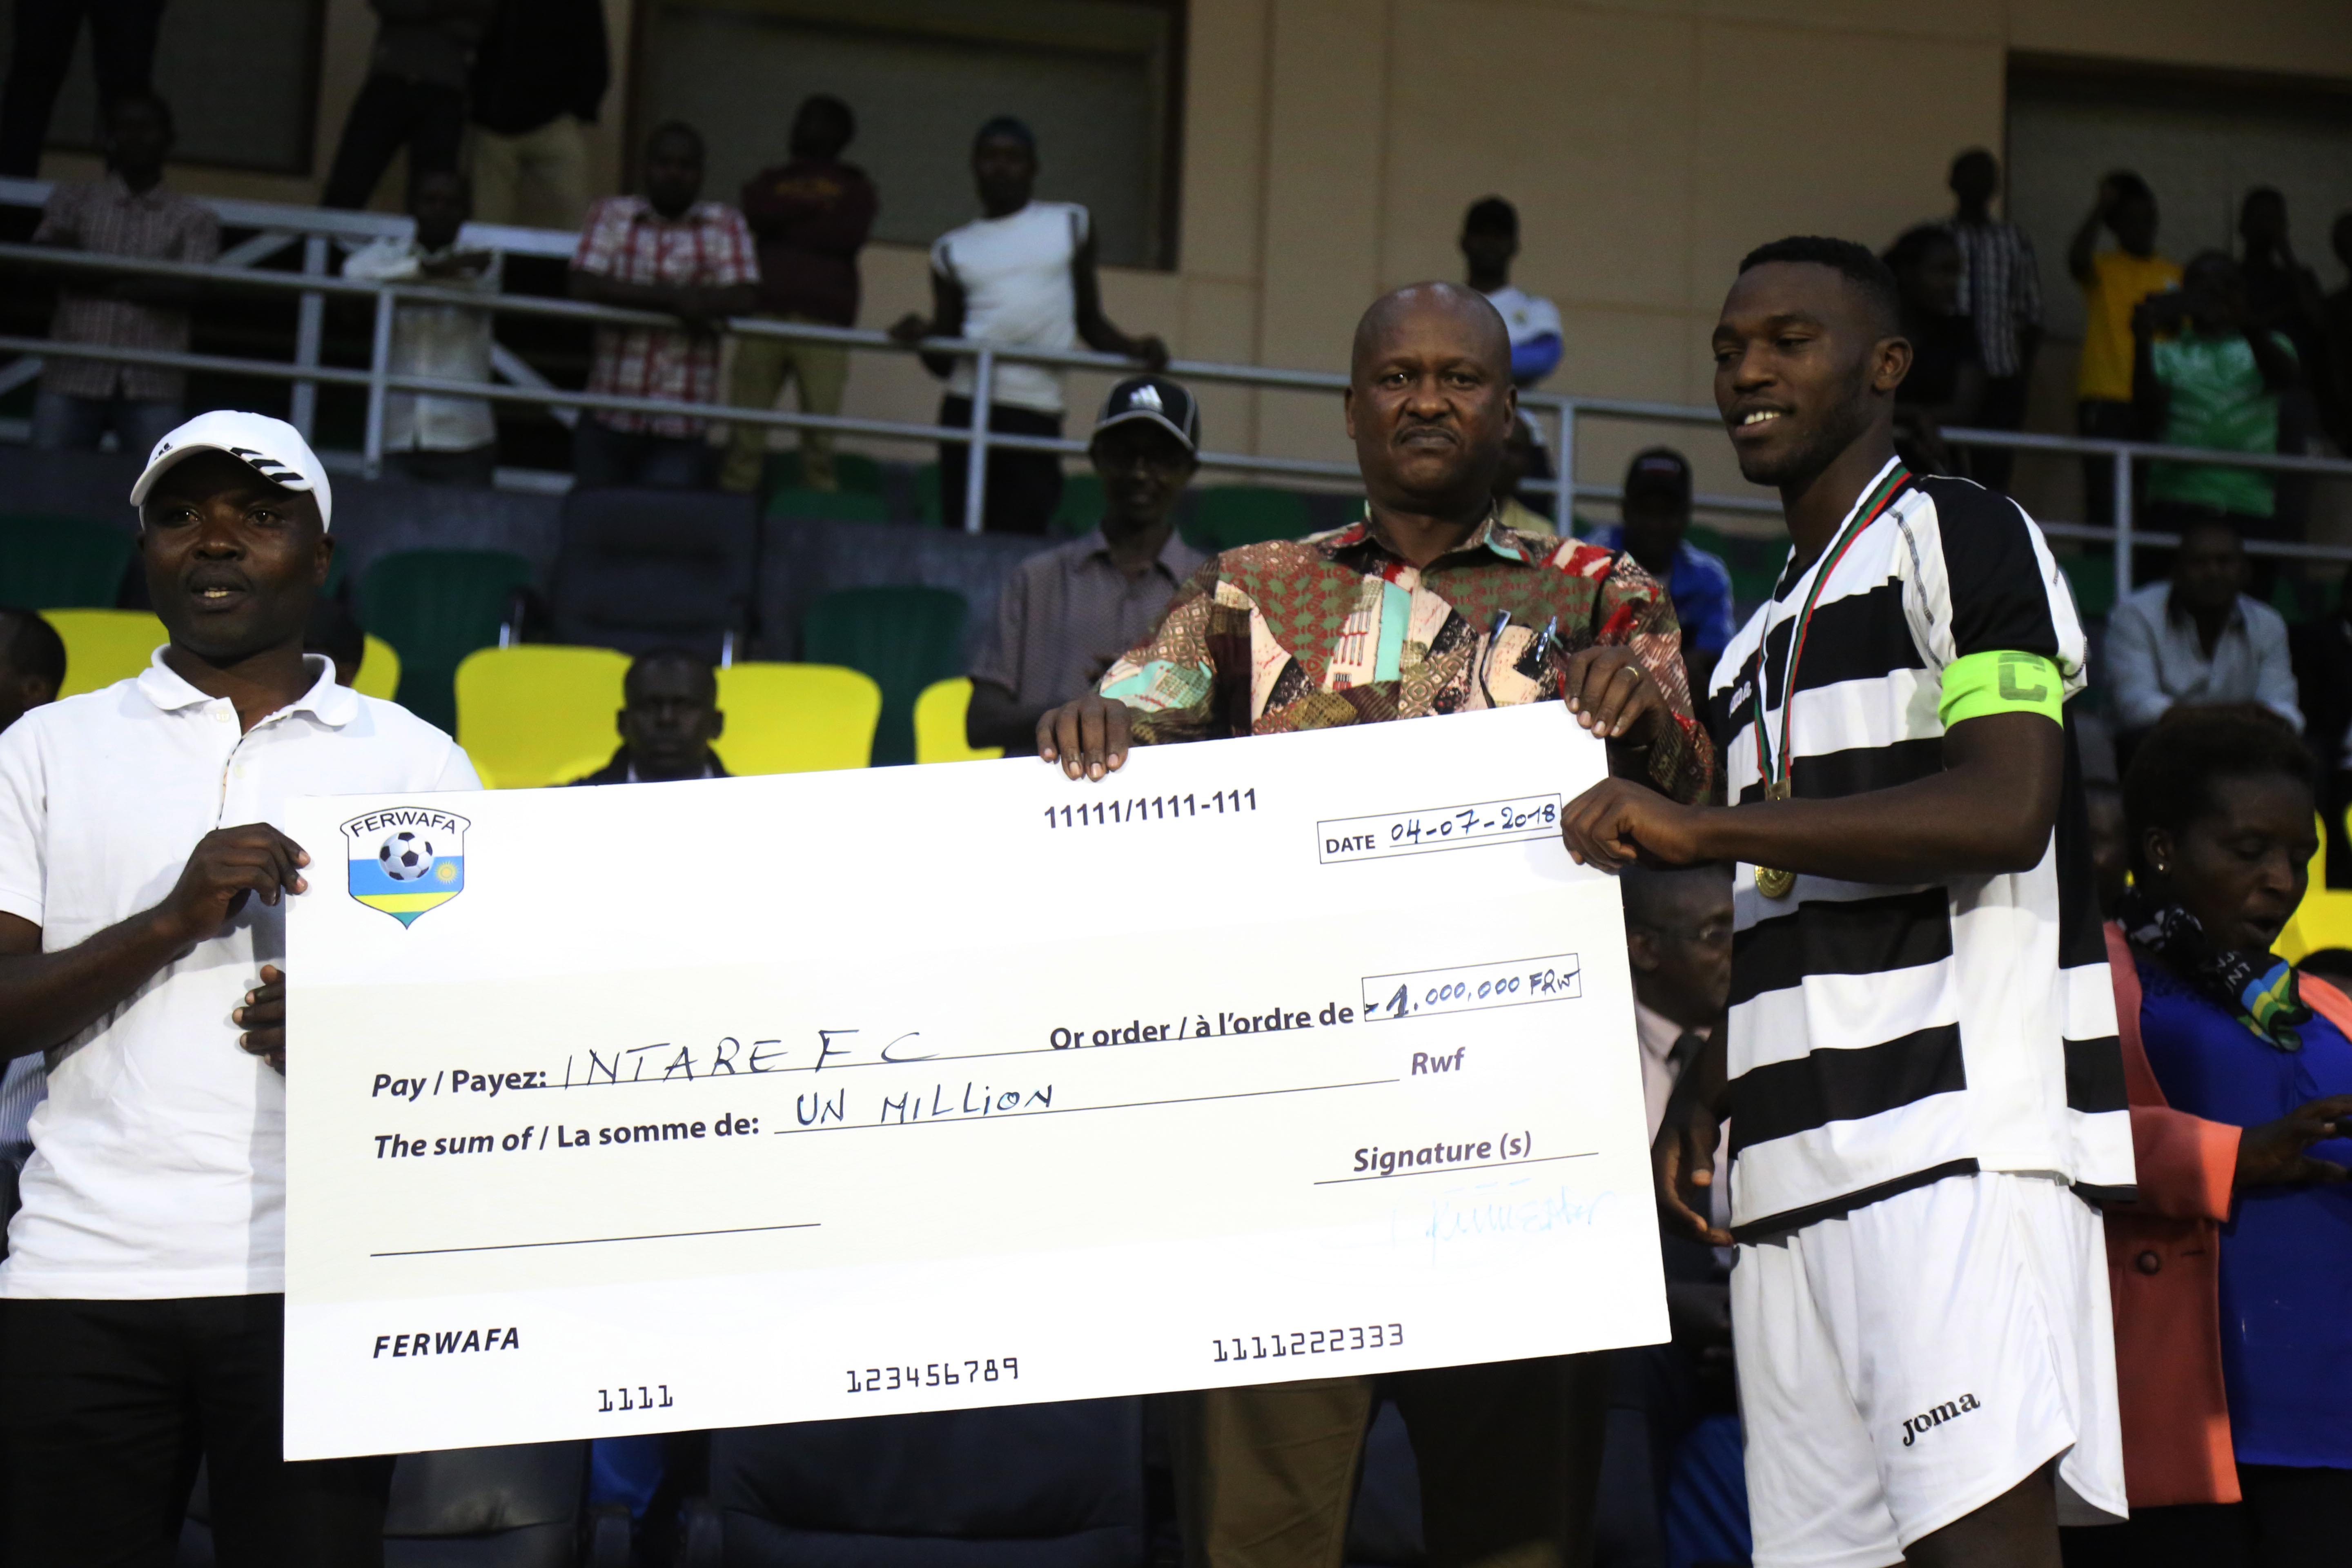 Second Division League Champion Intare FC get a cheque of one million Rwandan francs